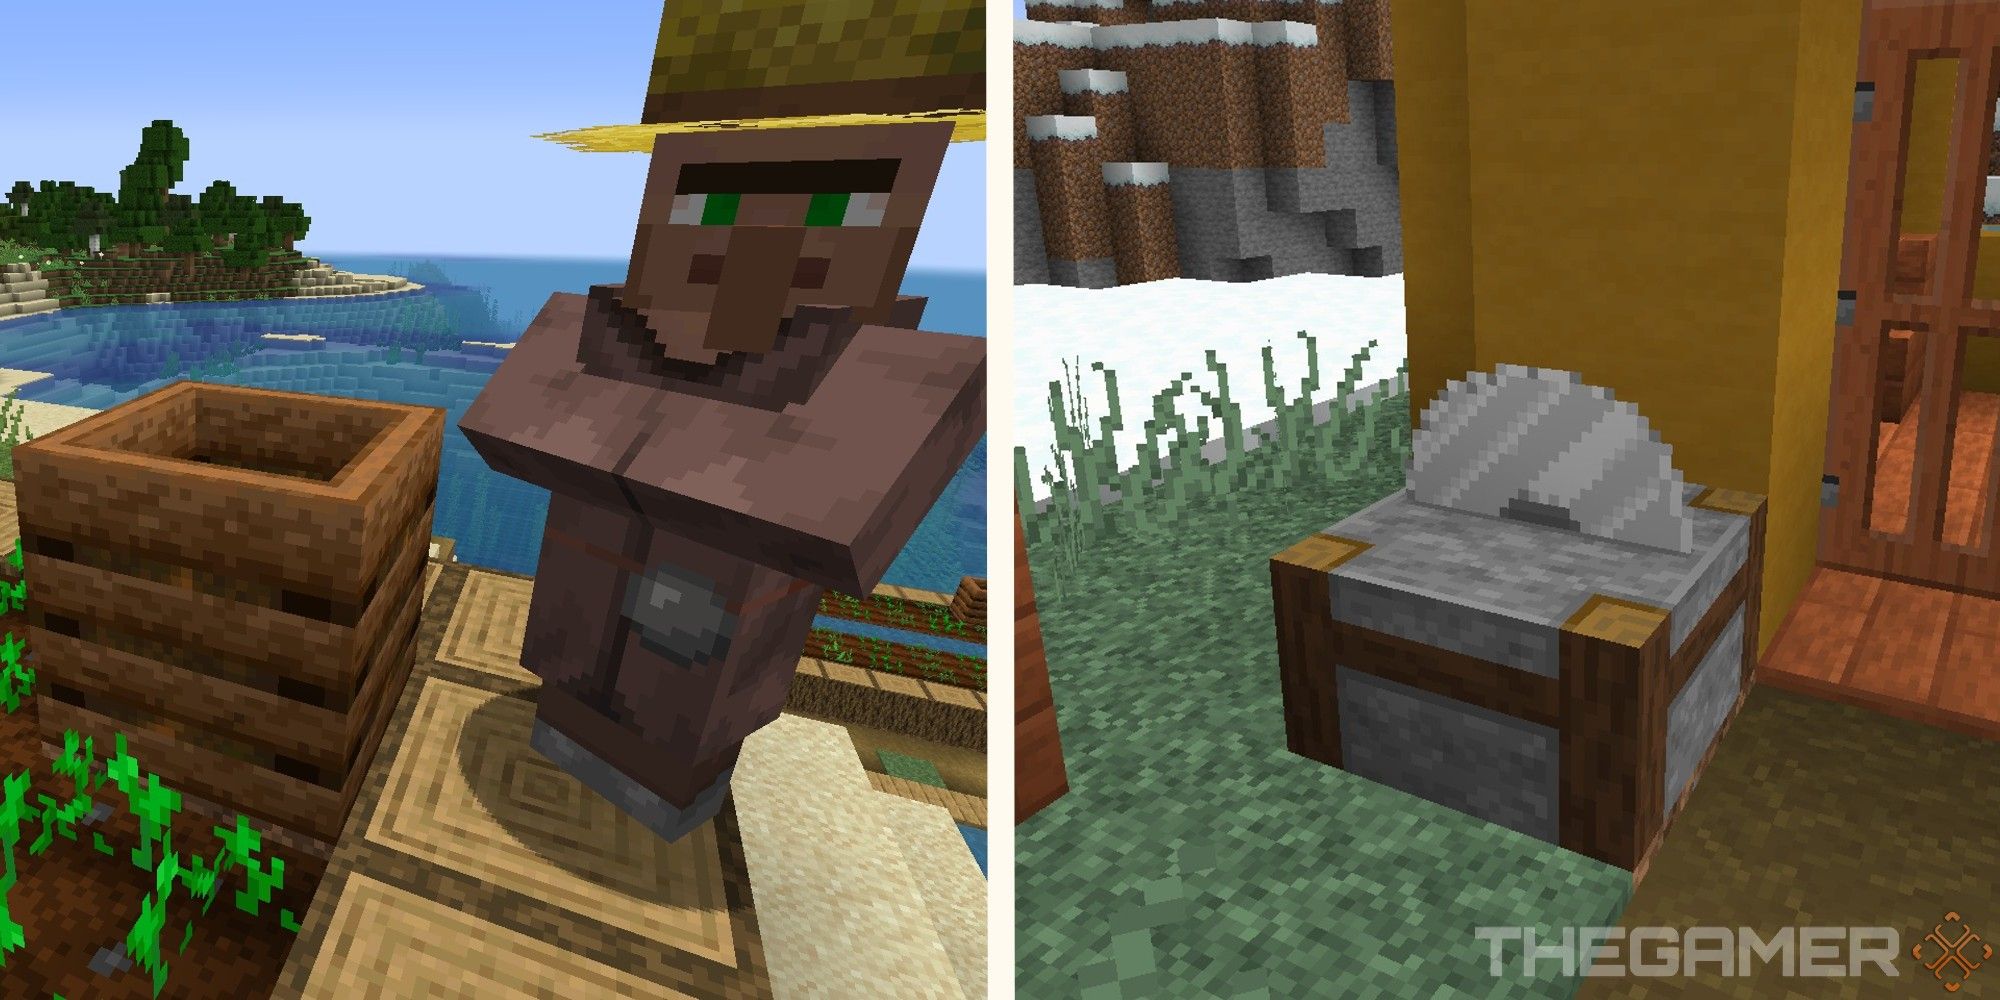 image of farmer villager with composter next to image of stonecutter